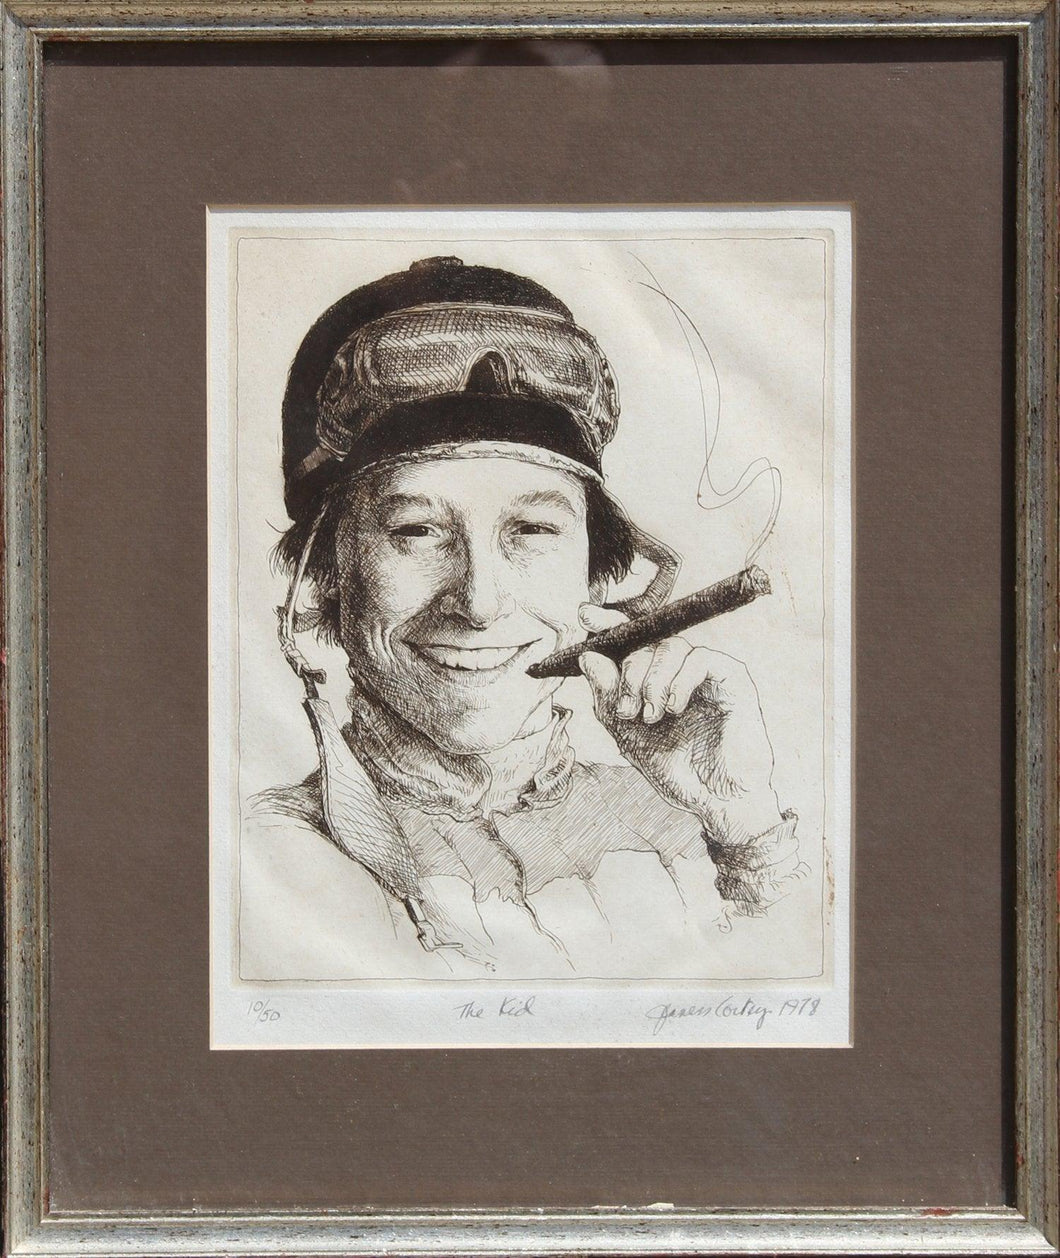 The Kid (Steve Cauthen) Etching | Jenness Cortez,{{product.type}}